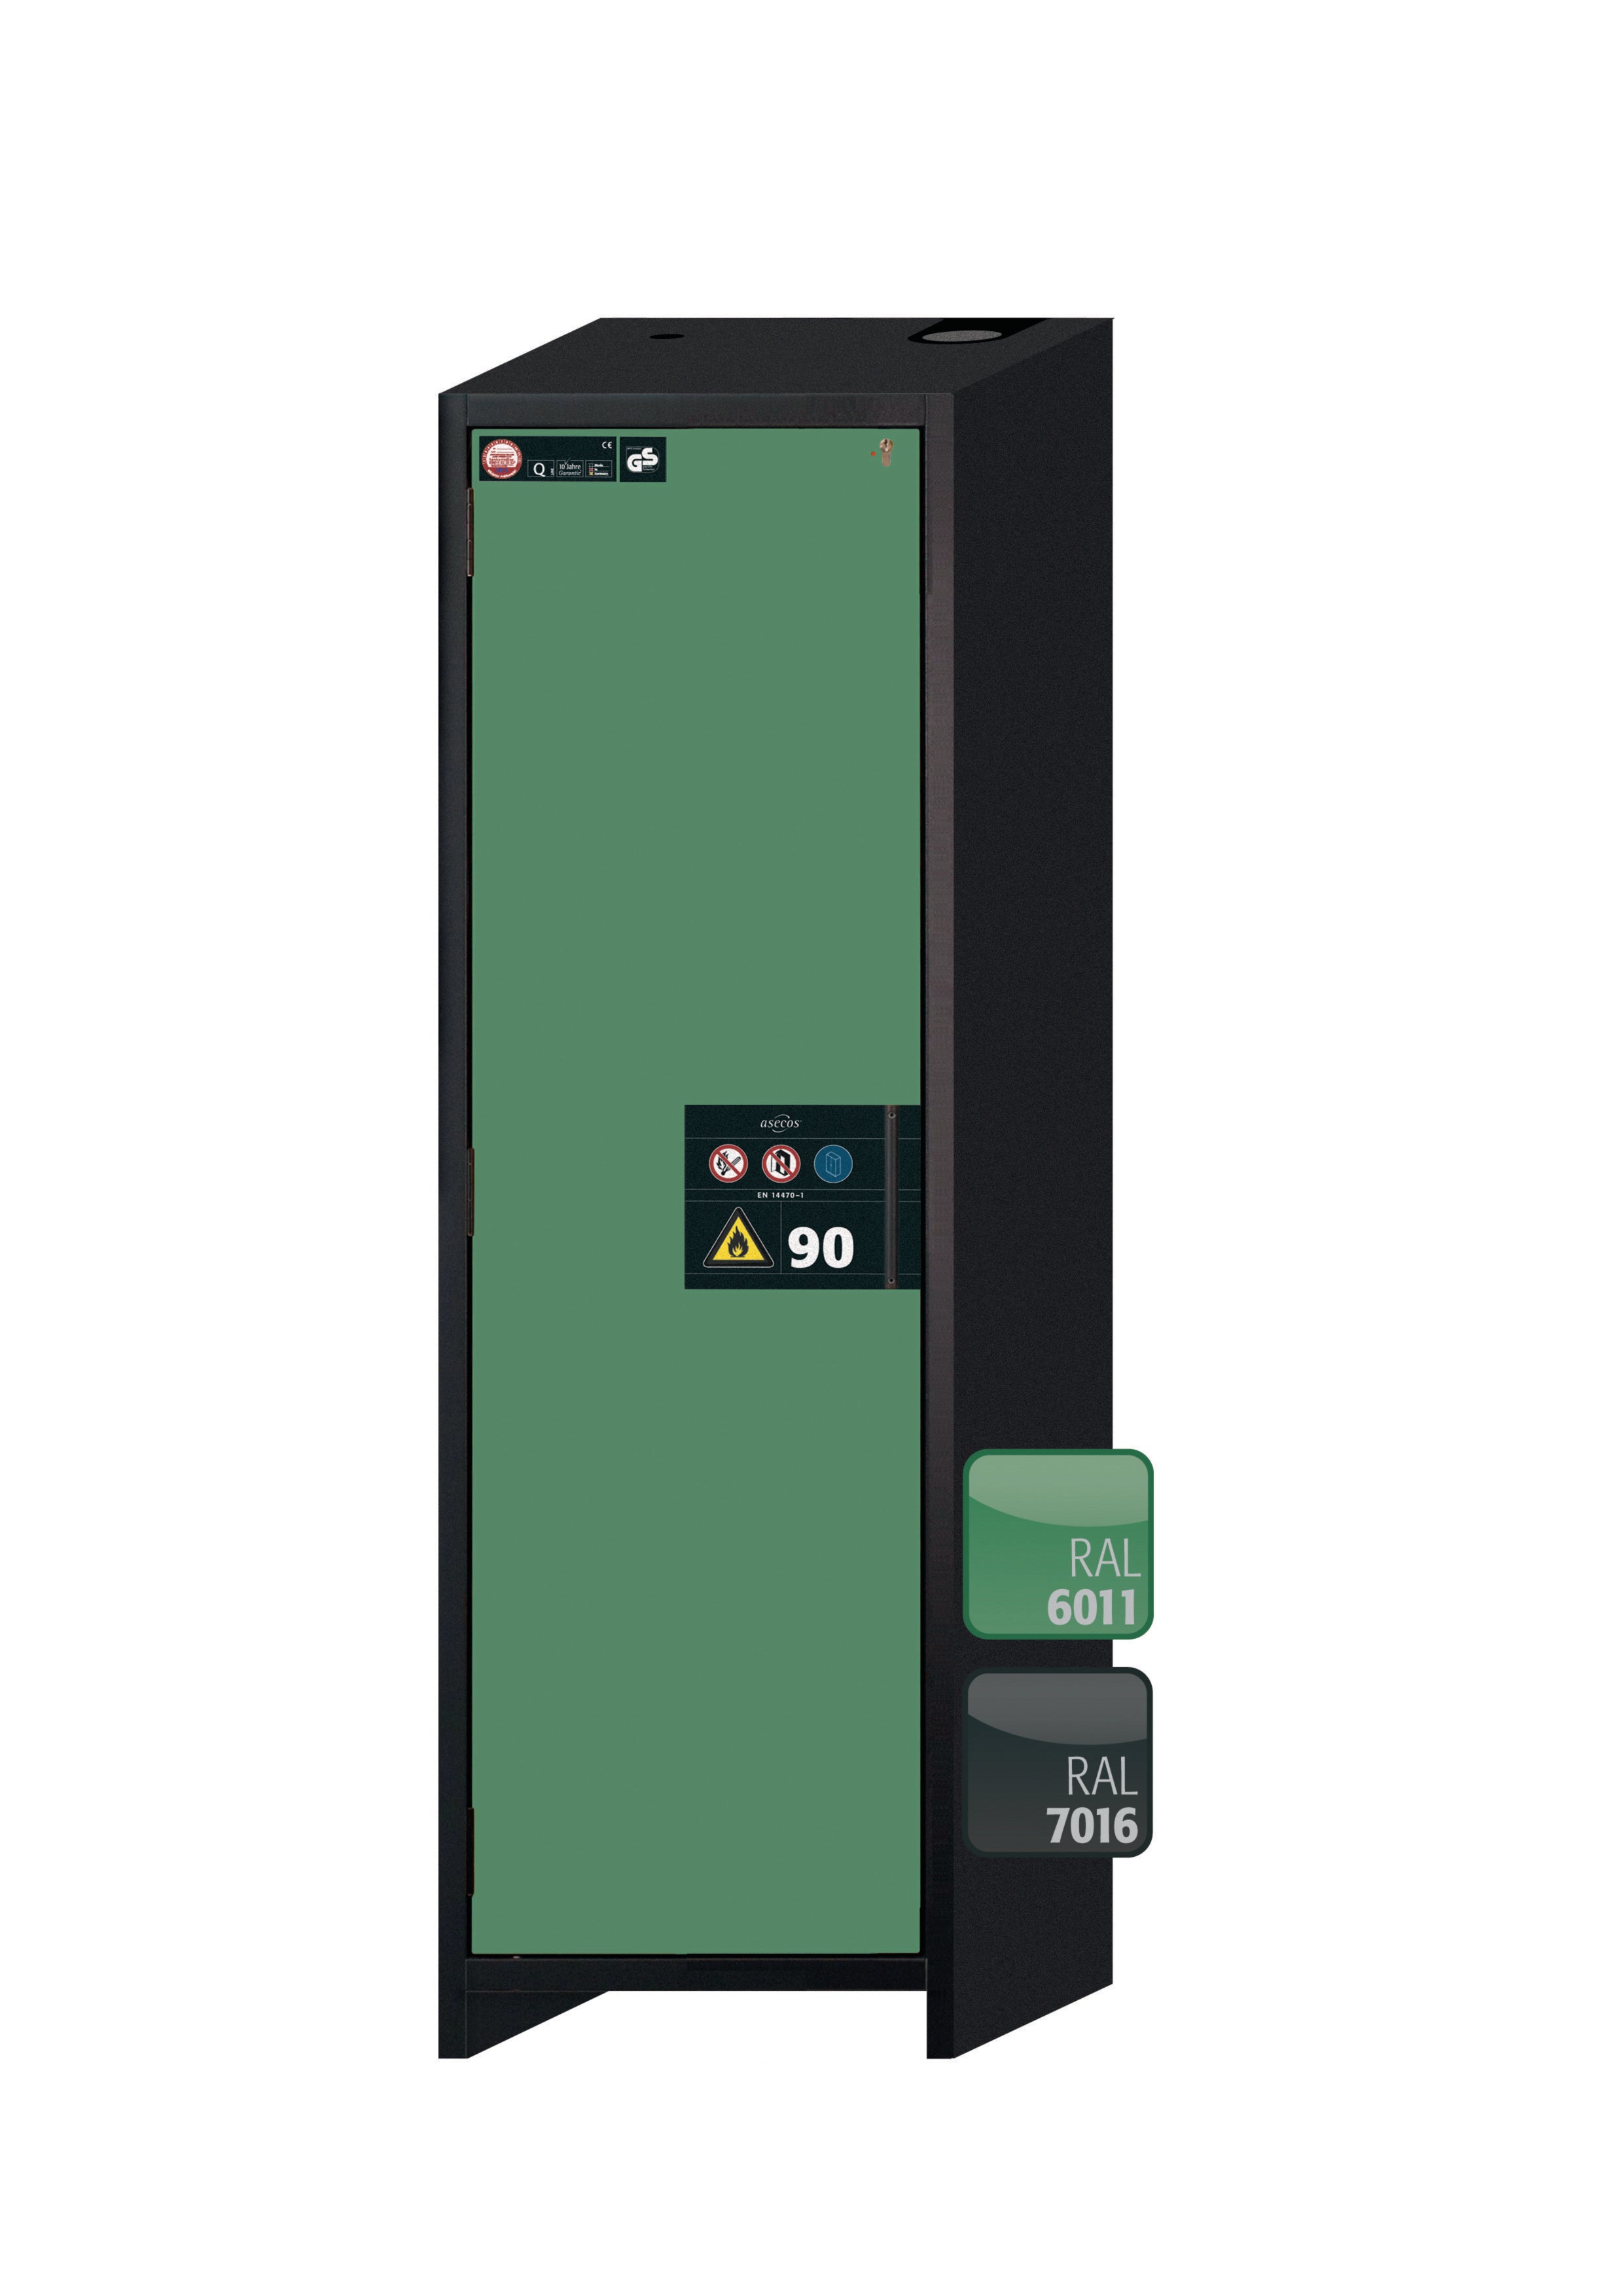 Type 90 safety storage cabinet Q-CLASSIC-90 model Q90.195.060 in reseda green RAL 6011 with 4x drawer (standard) (stainless steel 1.4301),